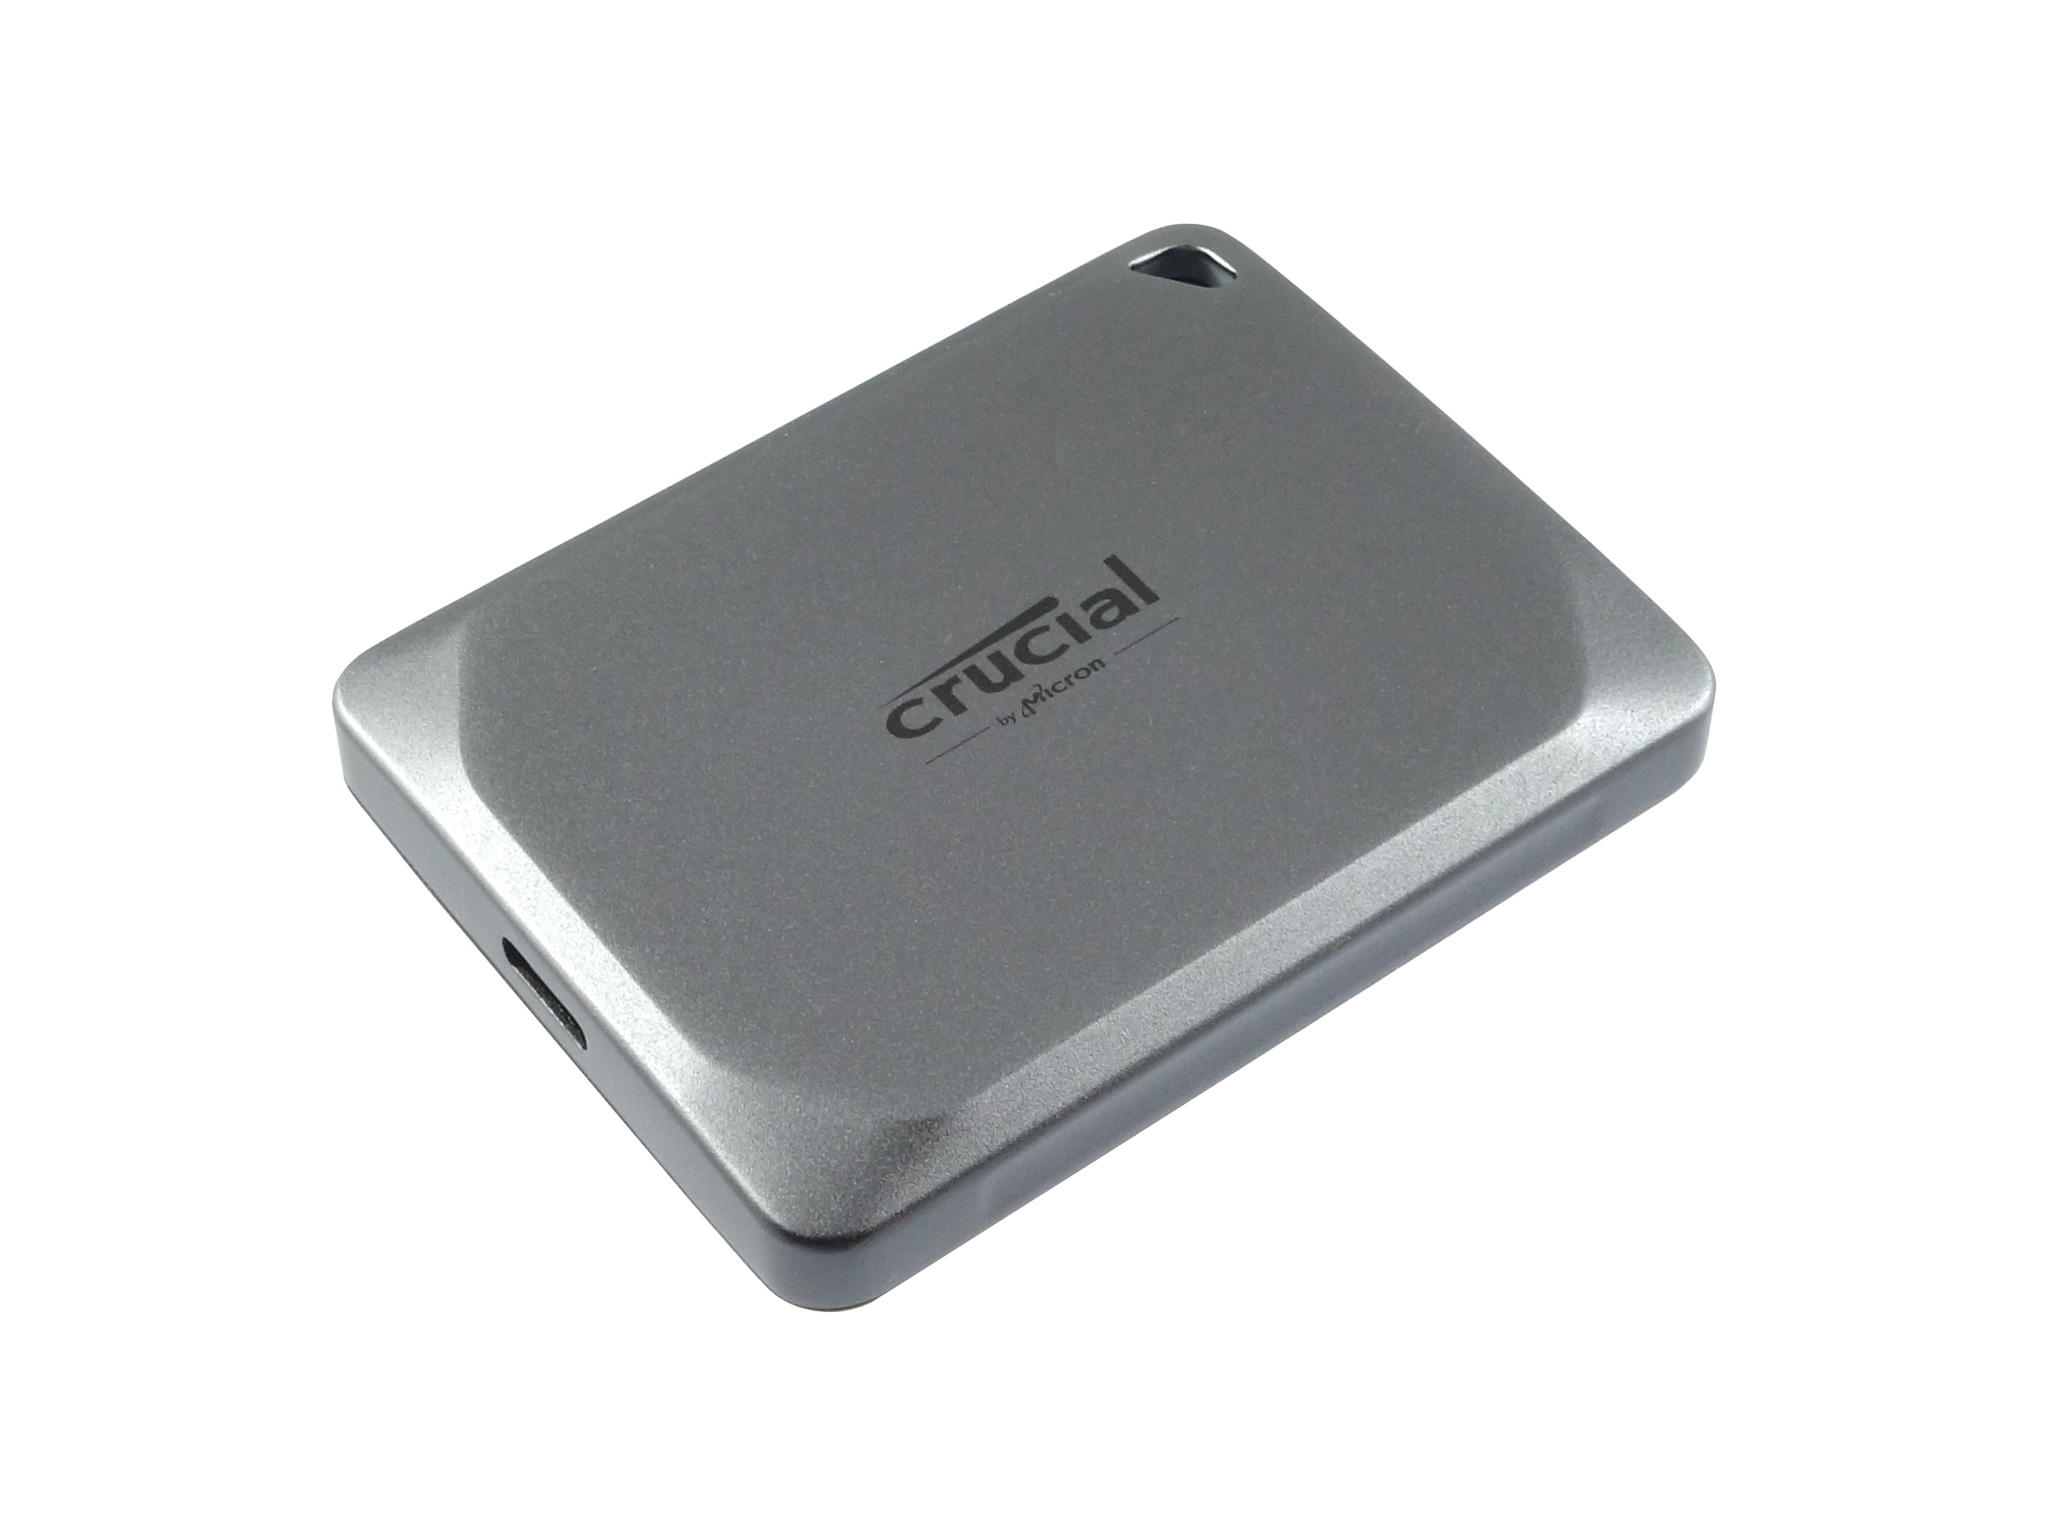 Crucial X9 Pro 1 TB Portable Solid State Drive - External 